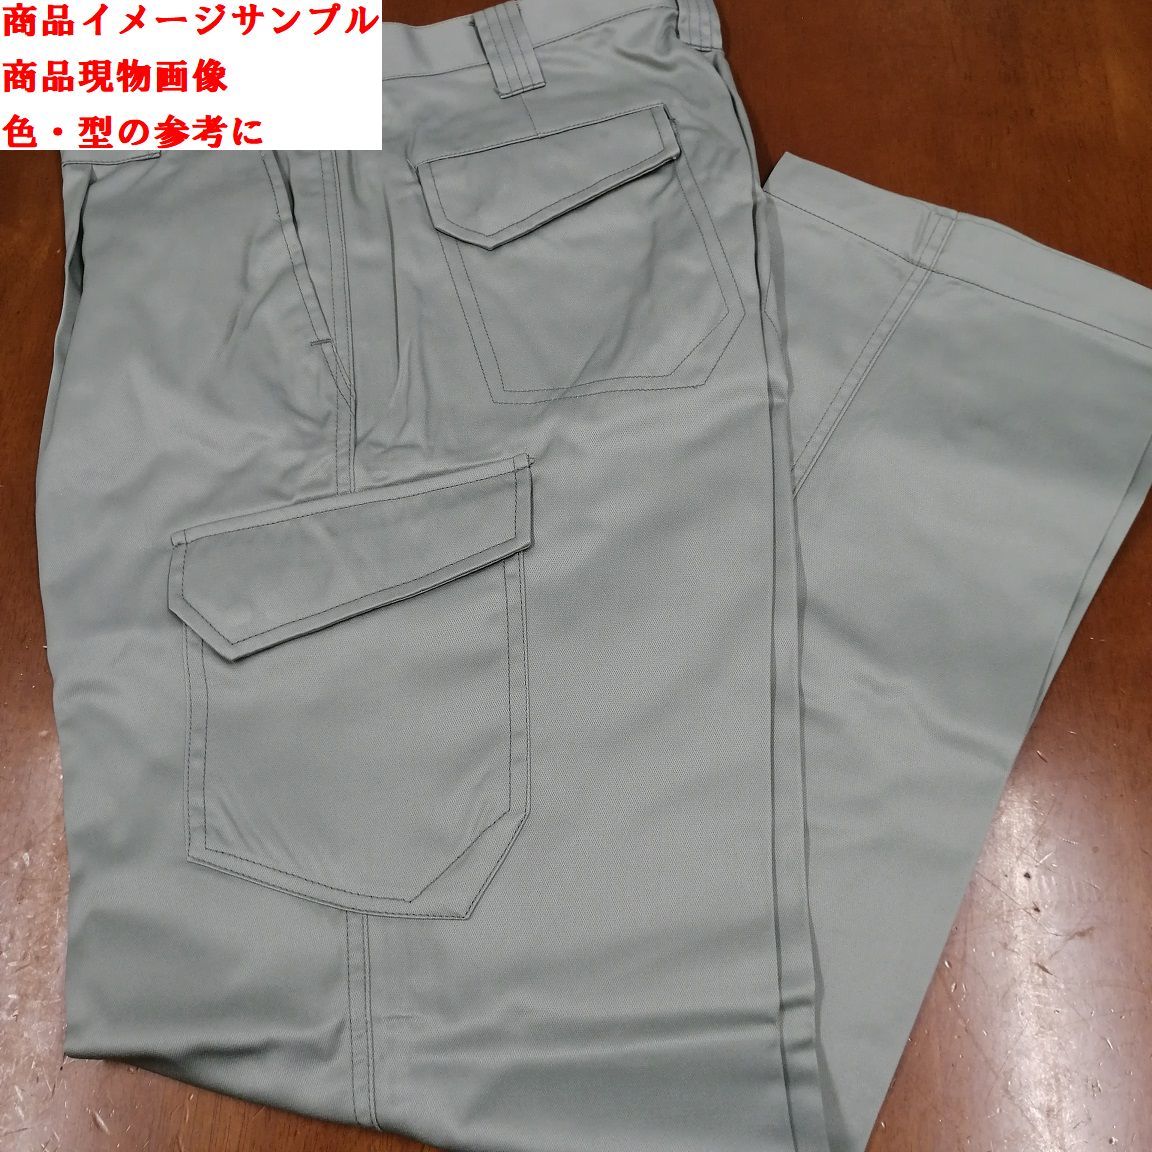 4-12/1 3 sheets set W101 C(43 light green T-442nakatsuka. clothes TOPCROWN top Crown cargo pants working clothes electro static charge prevention 